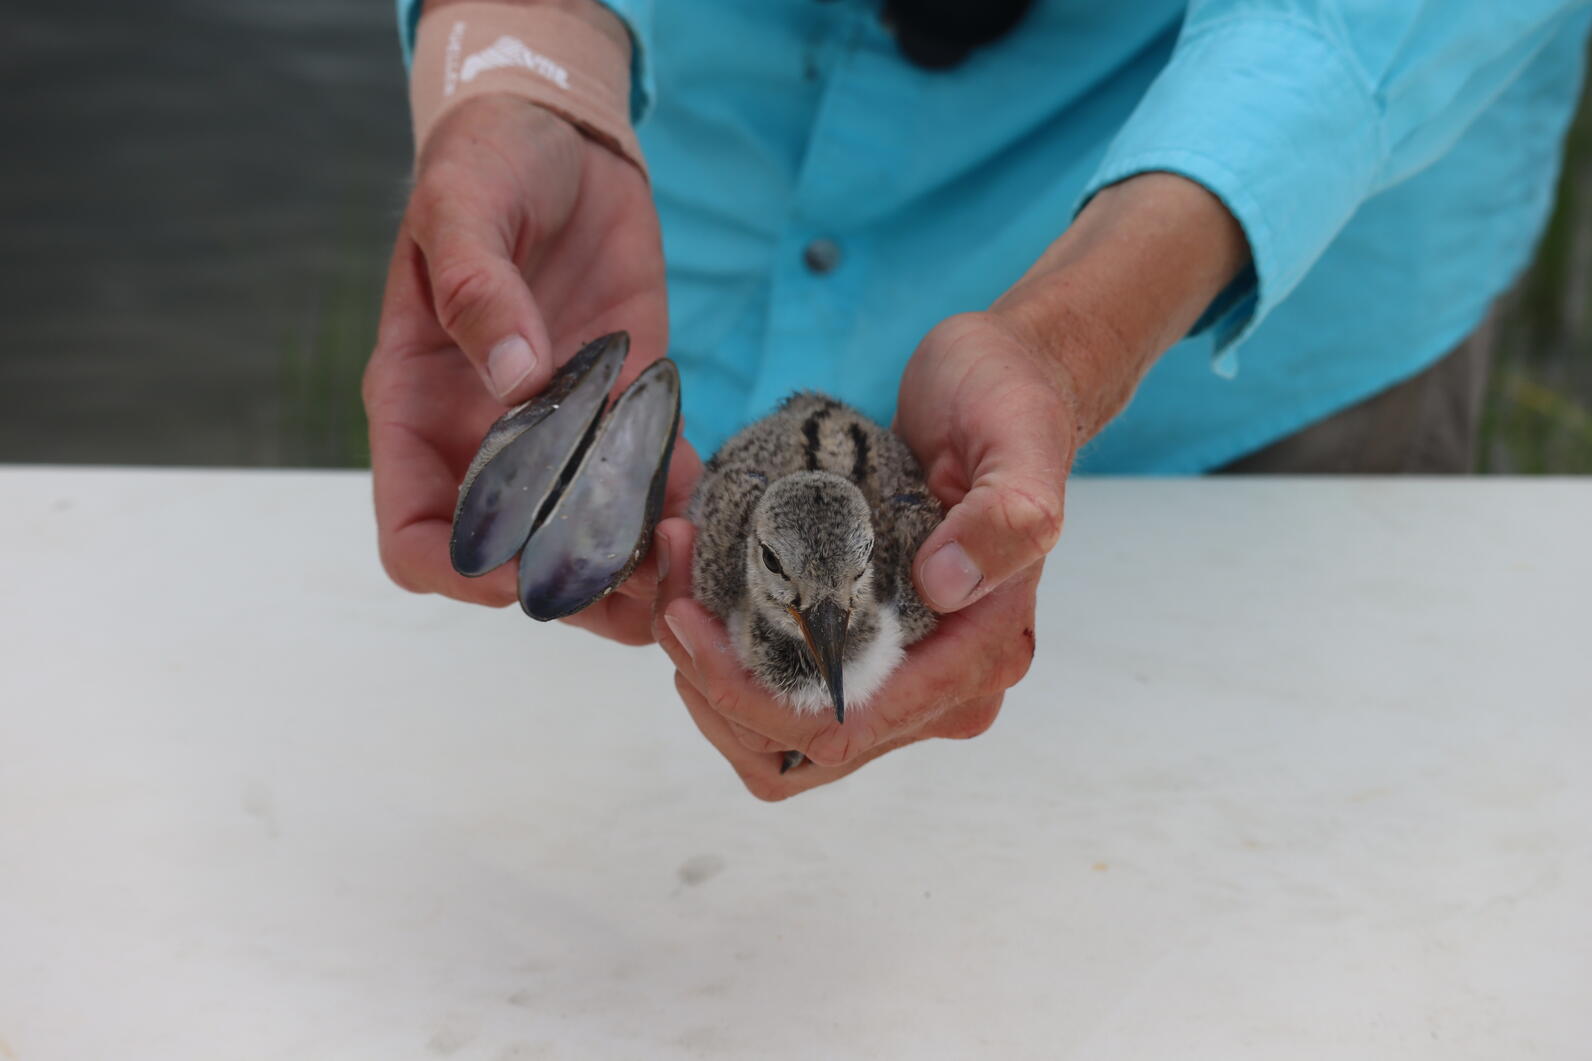 American Oystercatcher chick and a ribbed mussel shell—one of its favorite foods. Photo: Brittany Salmons/Audubon